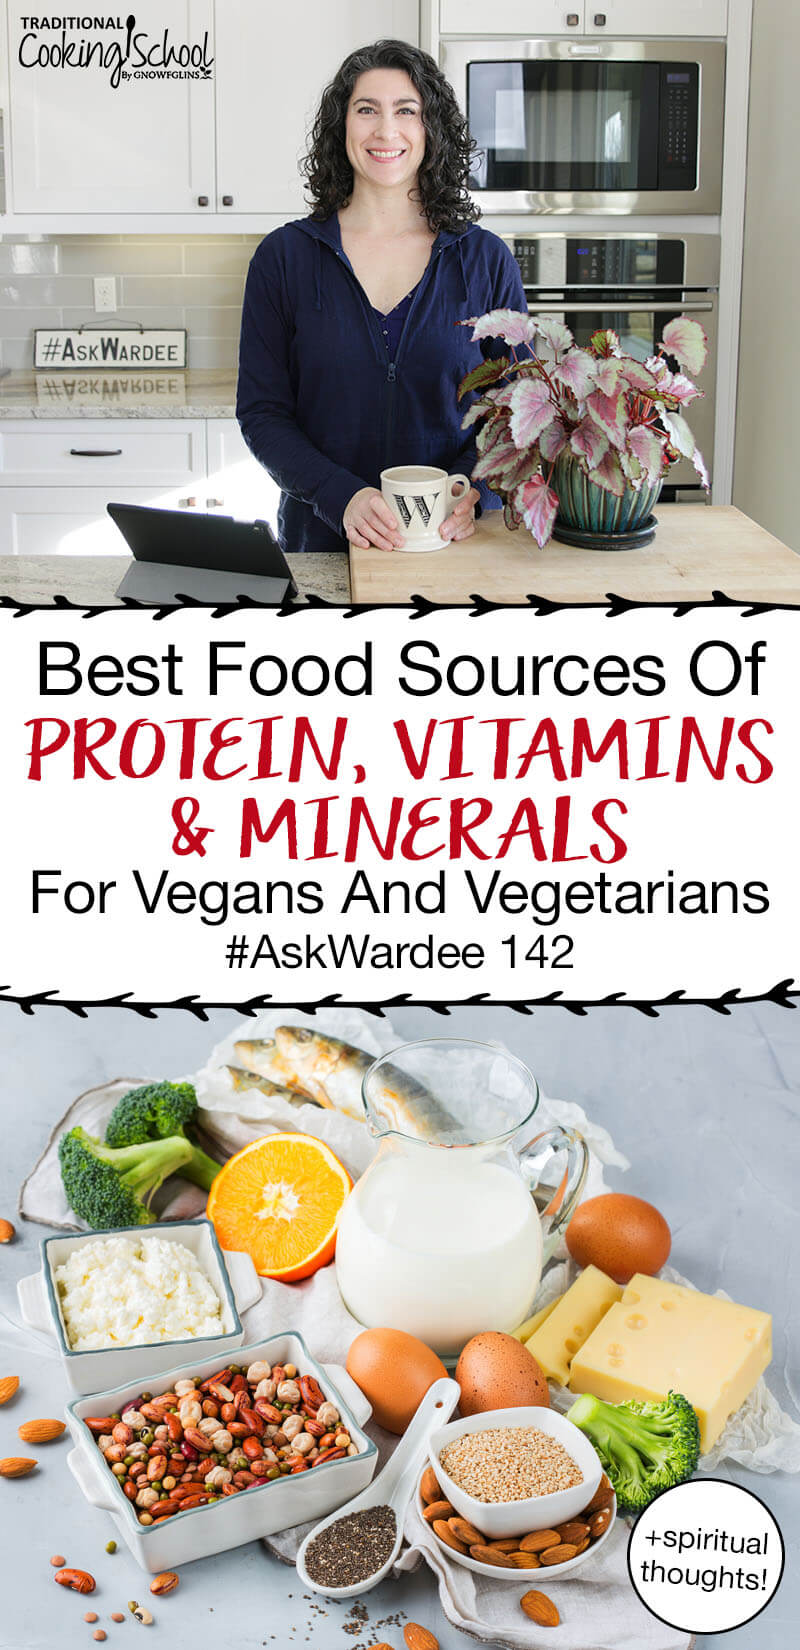 photo collage of a woman in a kitchen and an array of foods allowed on the vegetarian diet, including mostly plant-based with eggs and fish, with text overlay: "Best Food Sources Of Protein, Vitamins & Minerals For Vegans And Vegetarians #AskWardee 142"